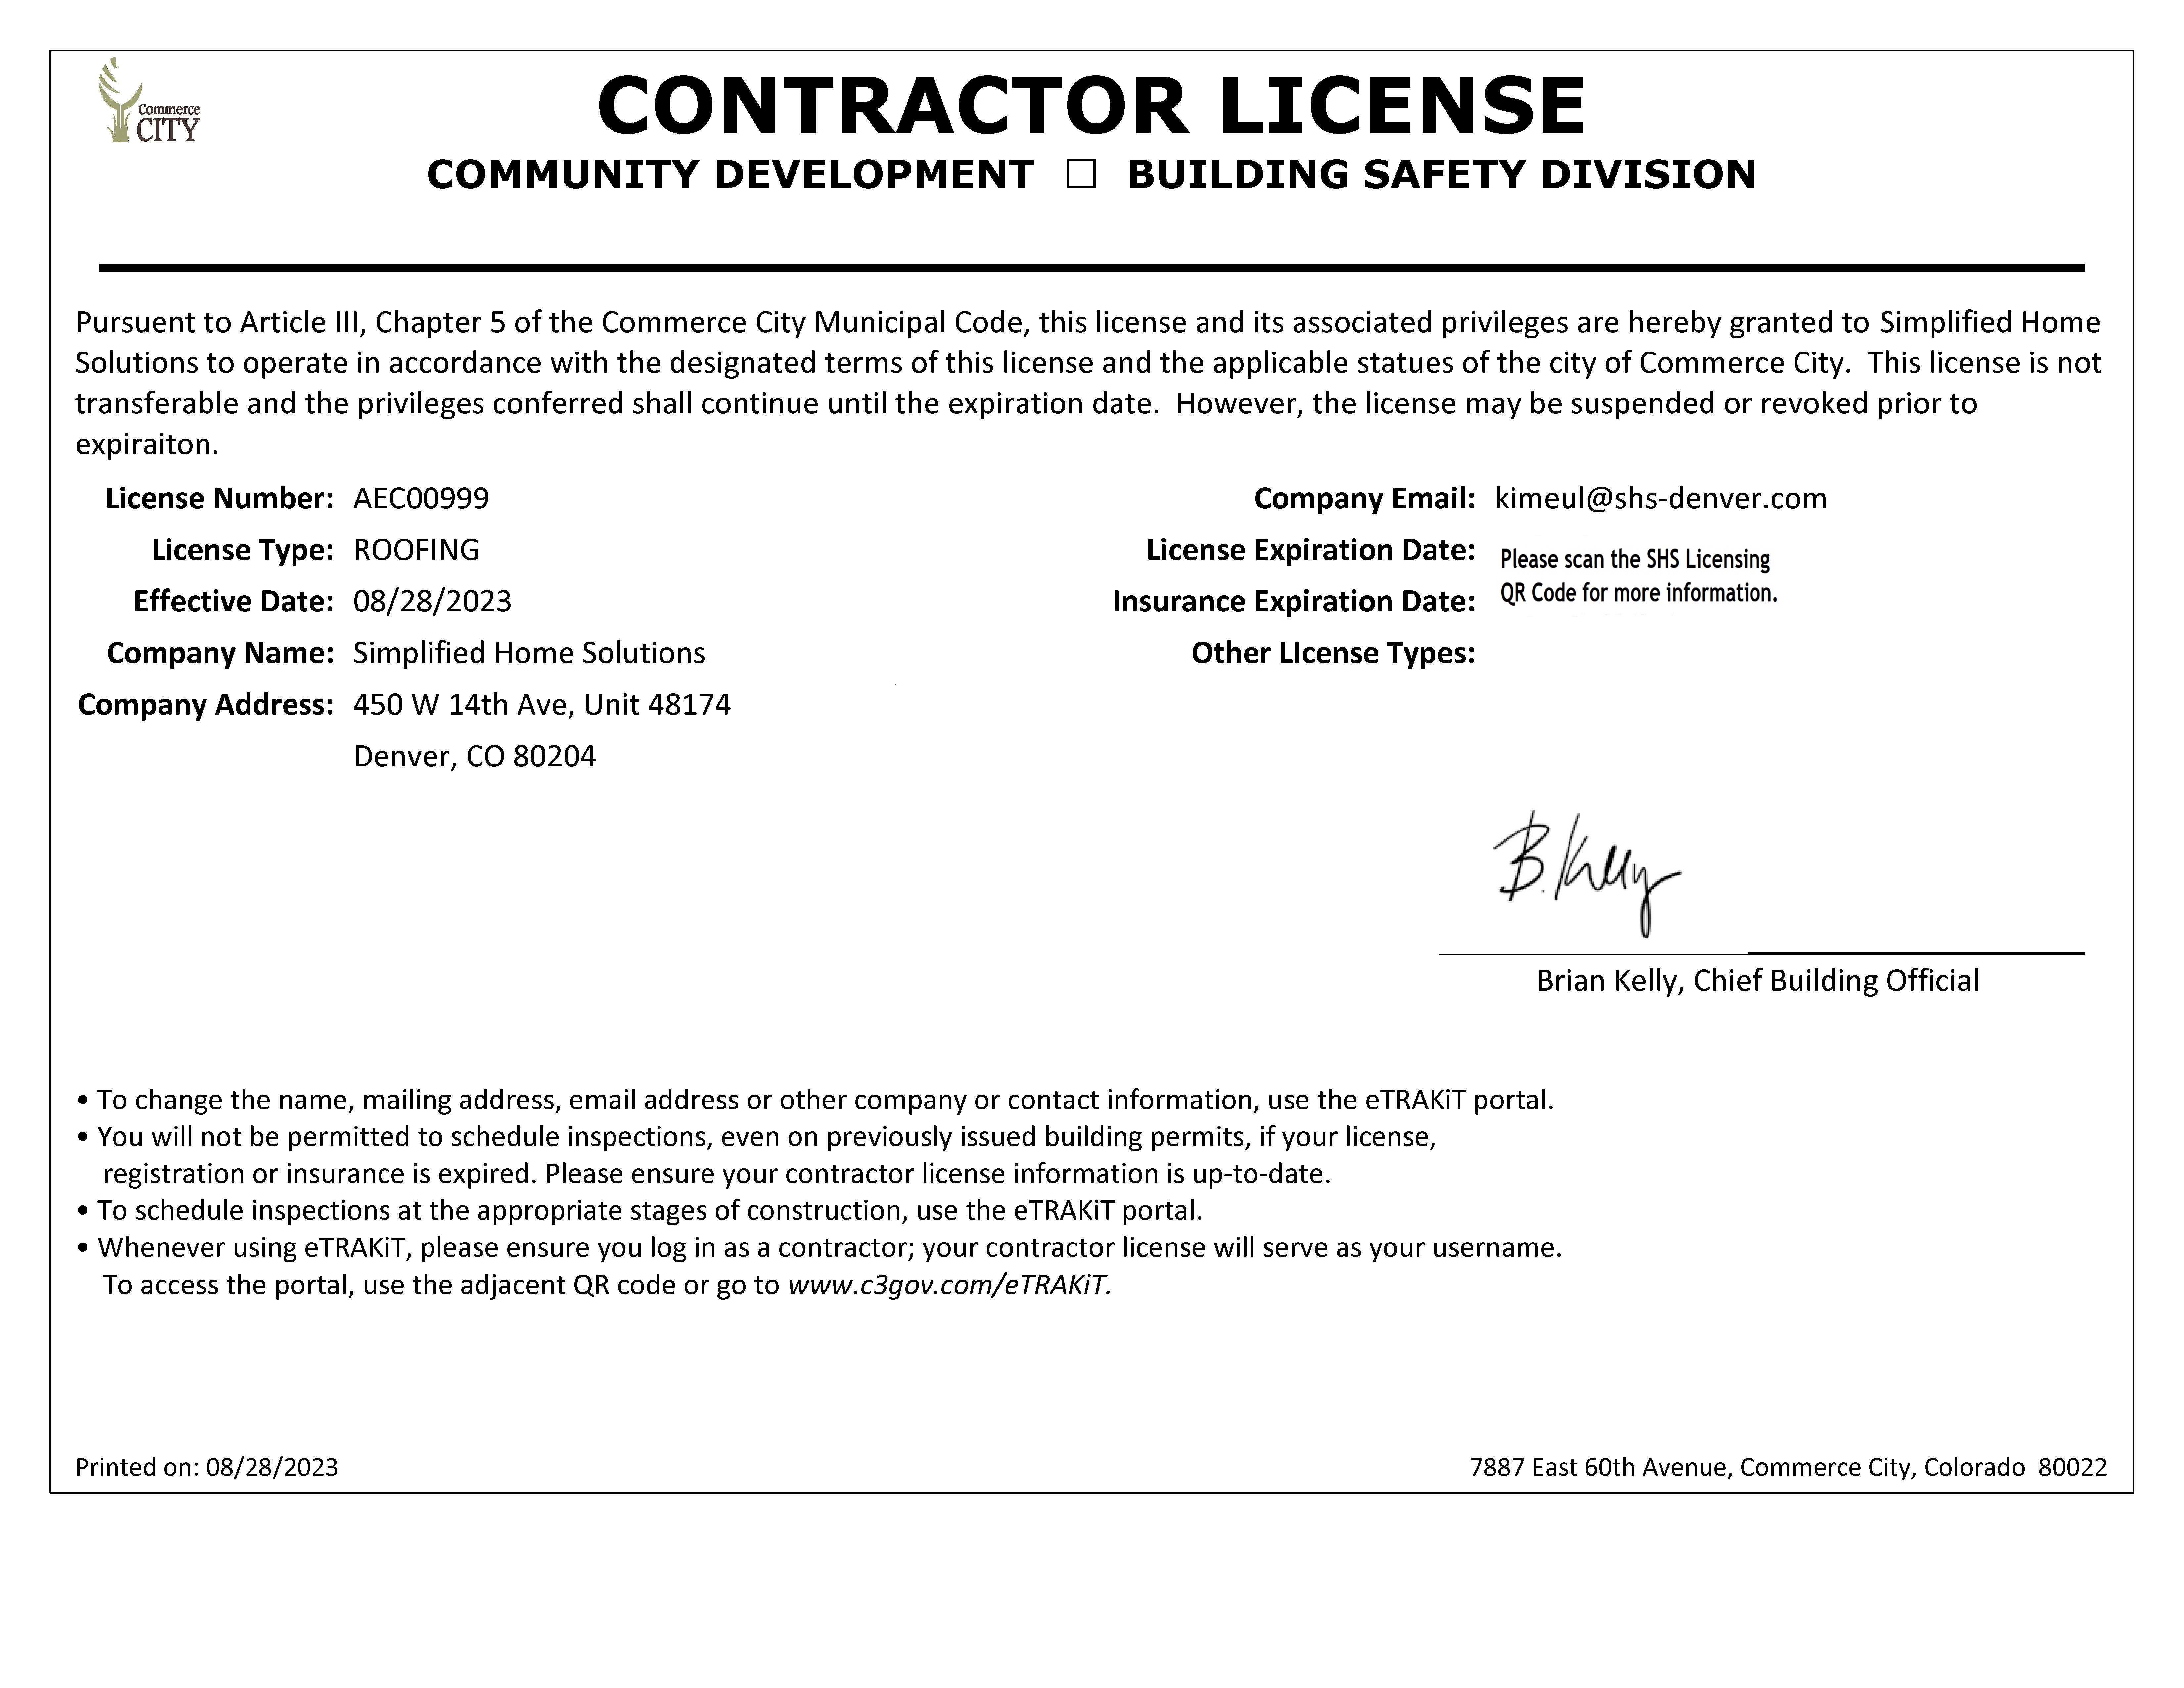 City of Commerce City - Contractor License